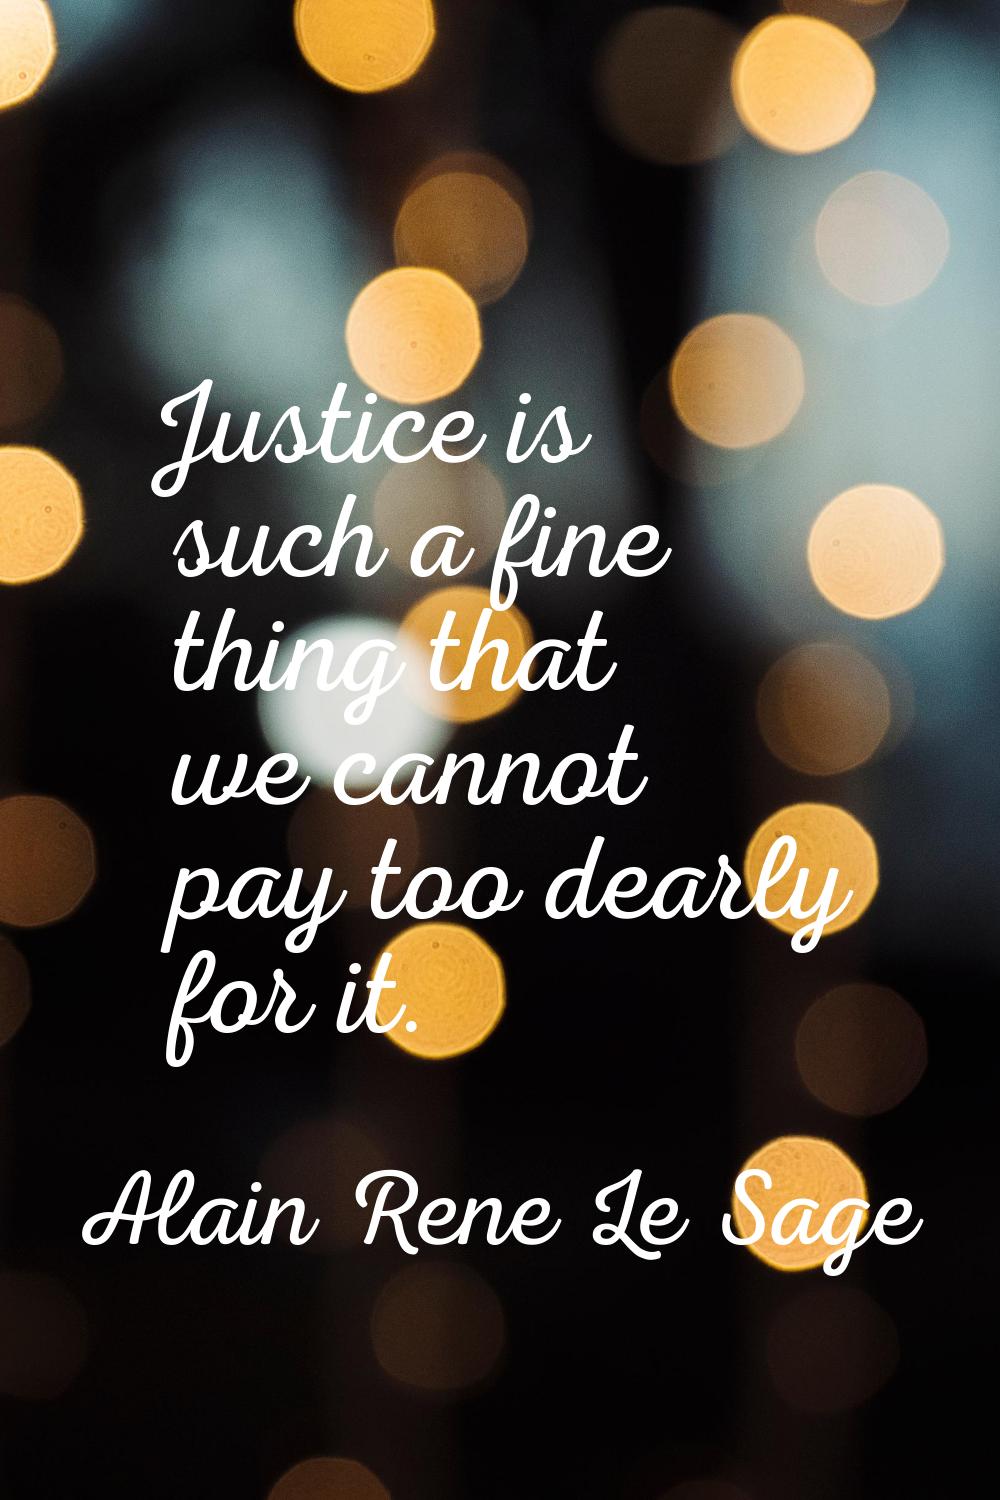 Justice is such a fine thing that we cannot pay too dearly for it.